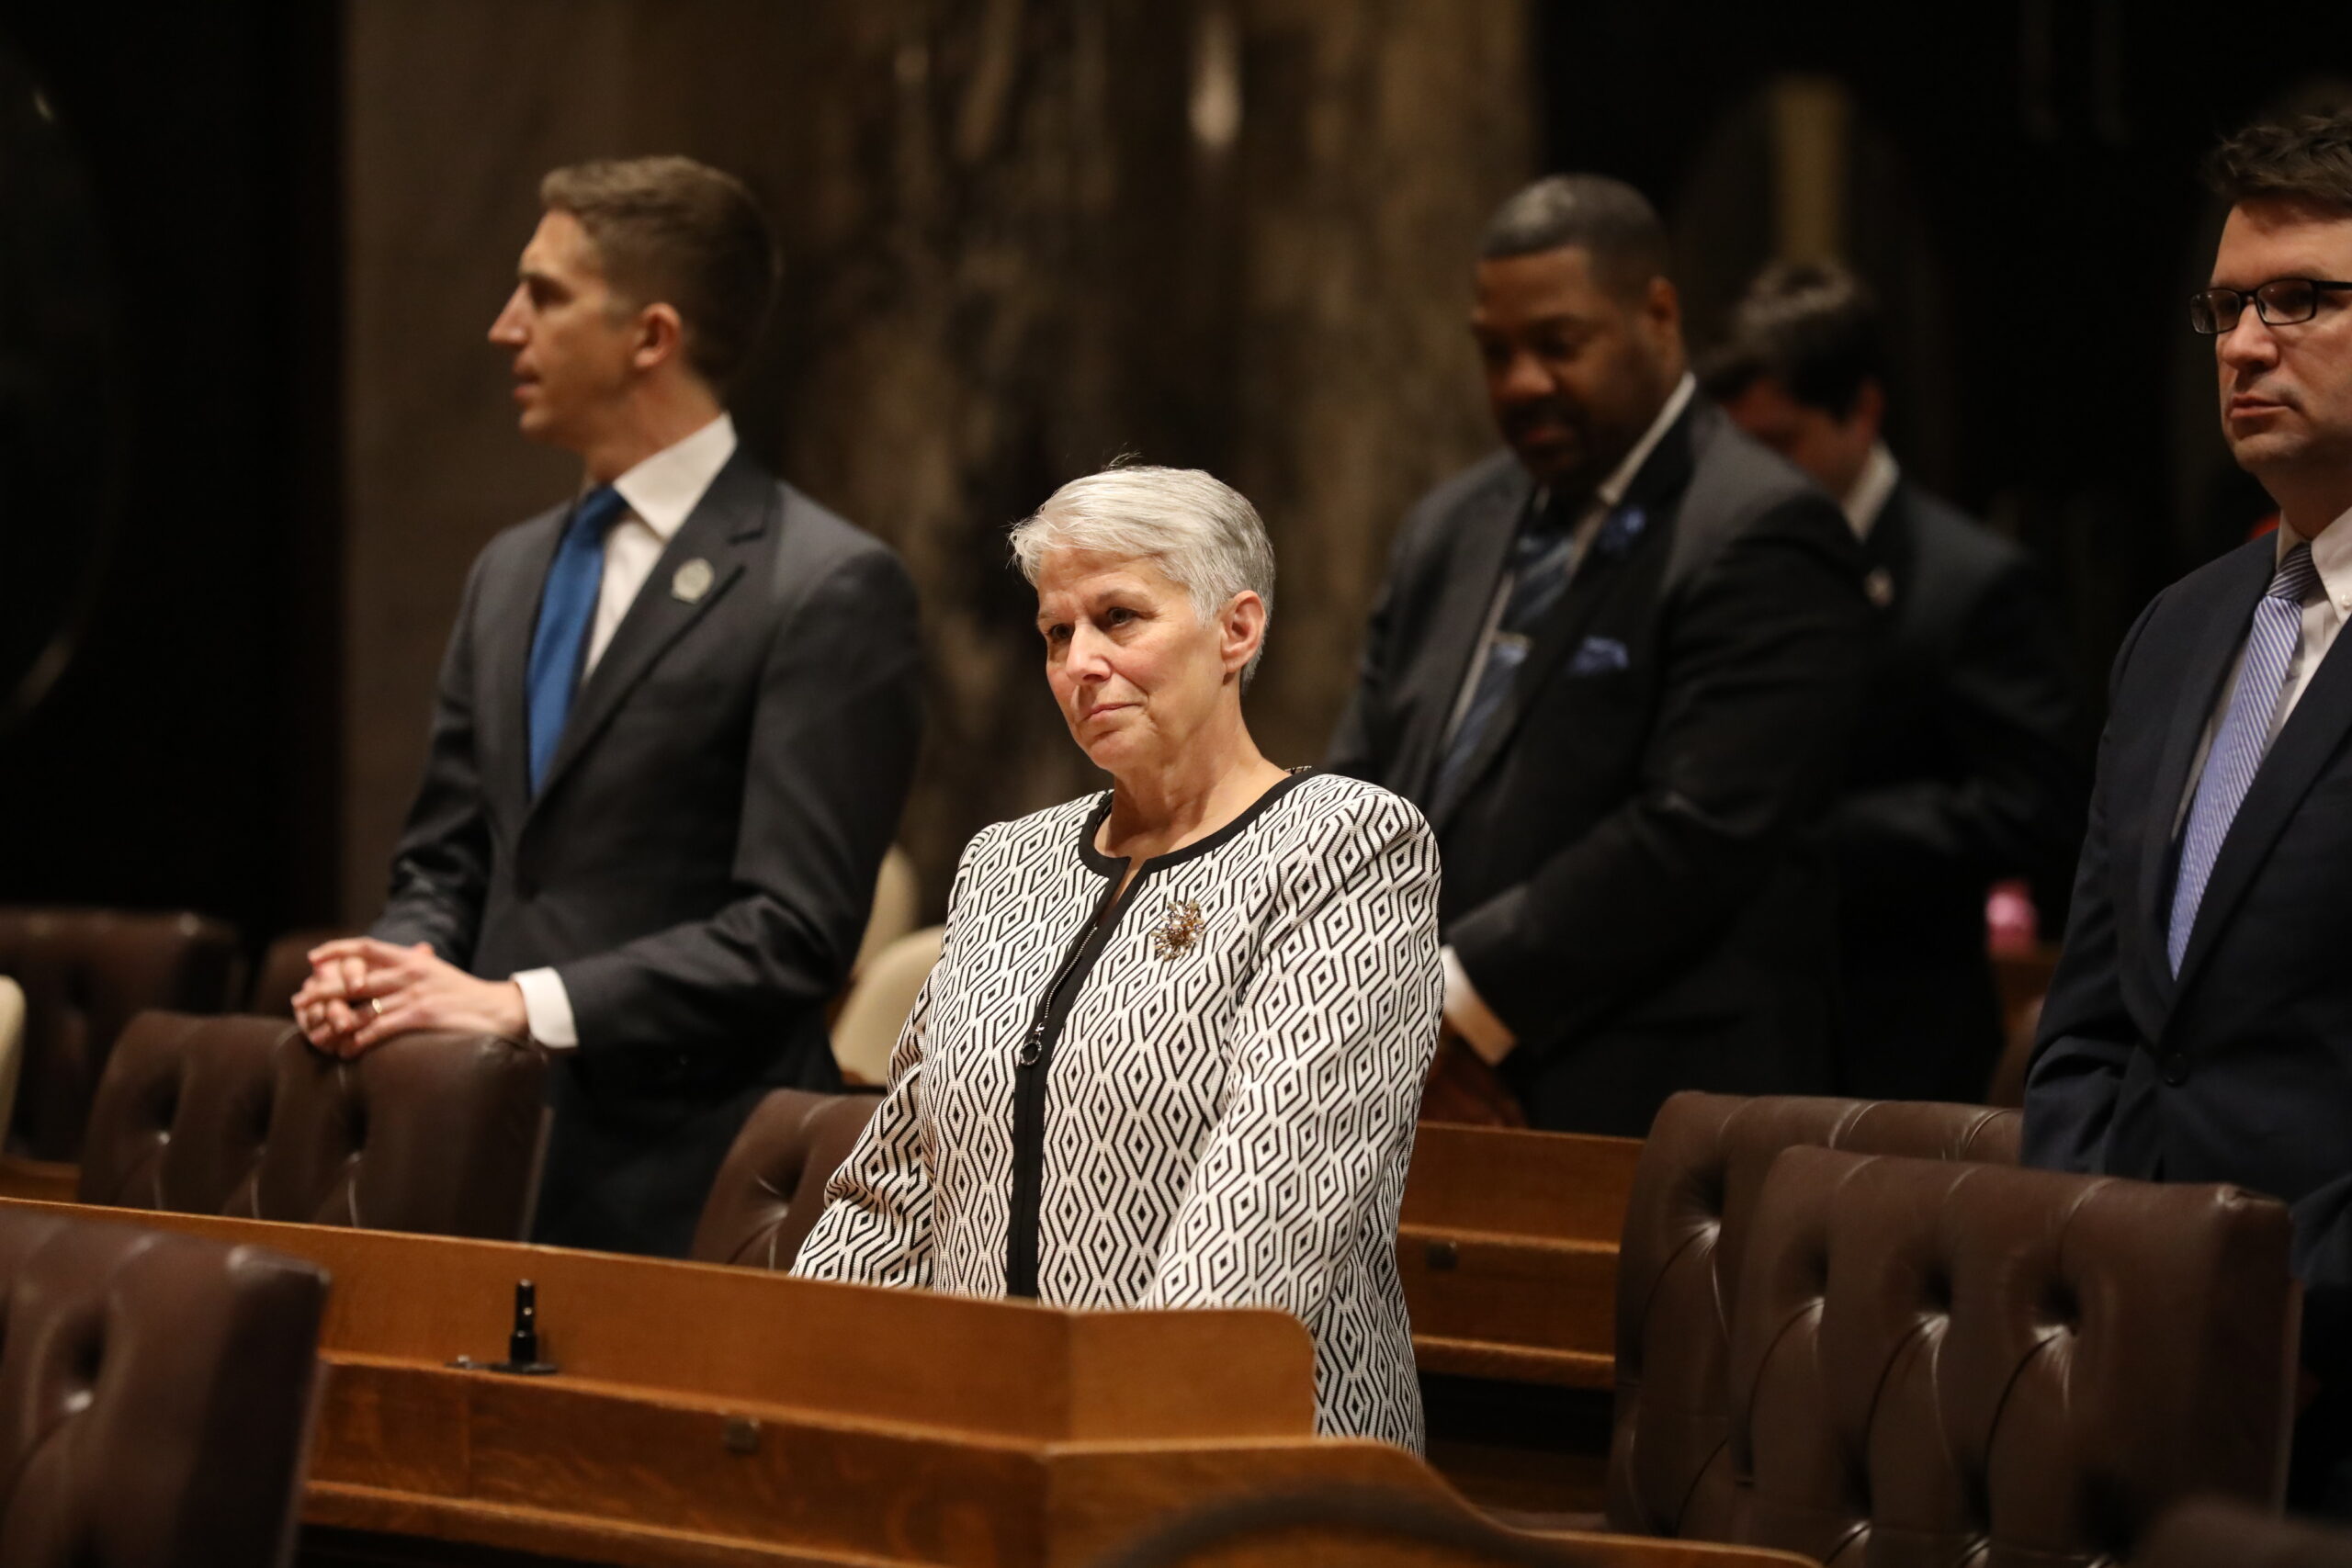 Beth Meyers, D-Bayfield, is seen at Gov. Tony Evers' second State of the State address